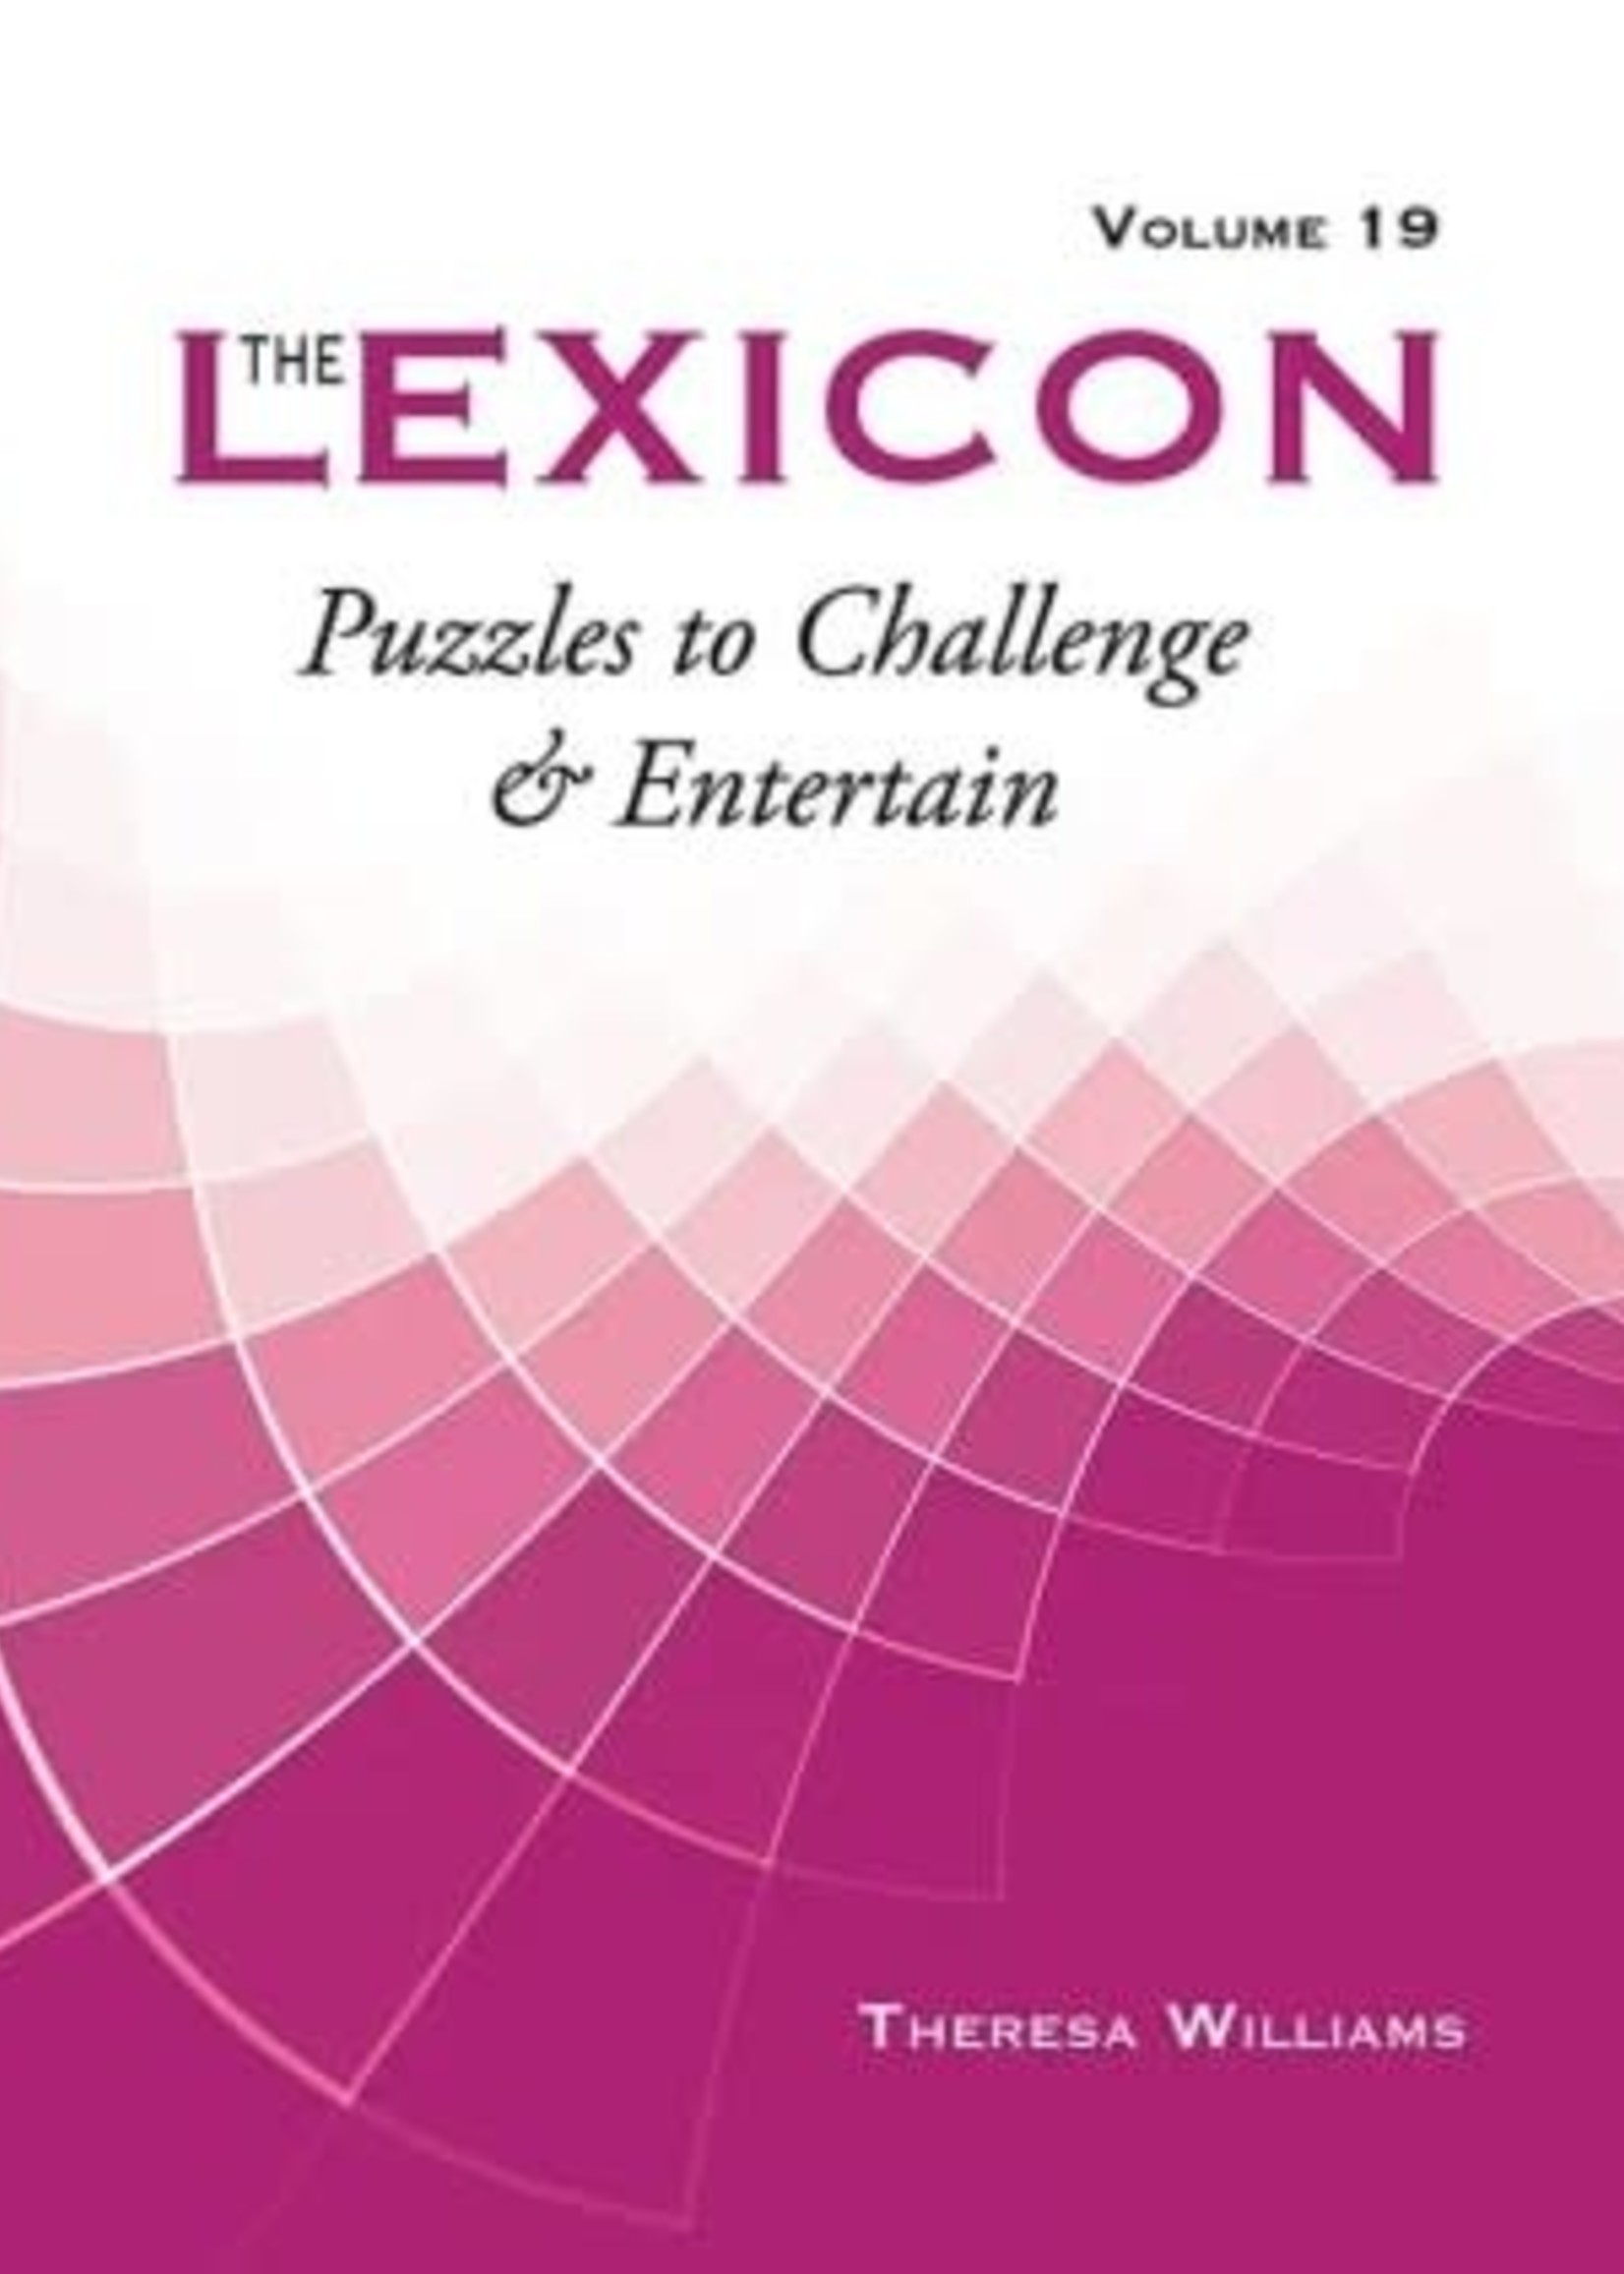 Lexicon 19: Puzzles to Challenge & Entertain by Theresa Williams